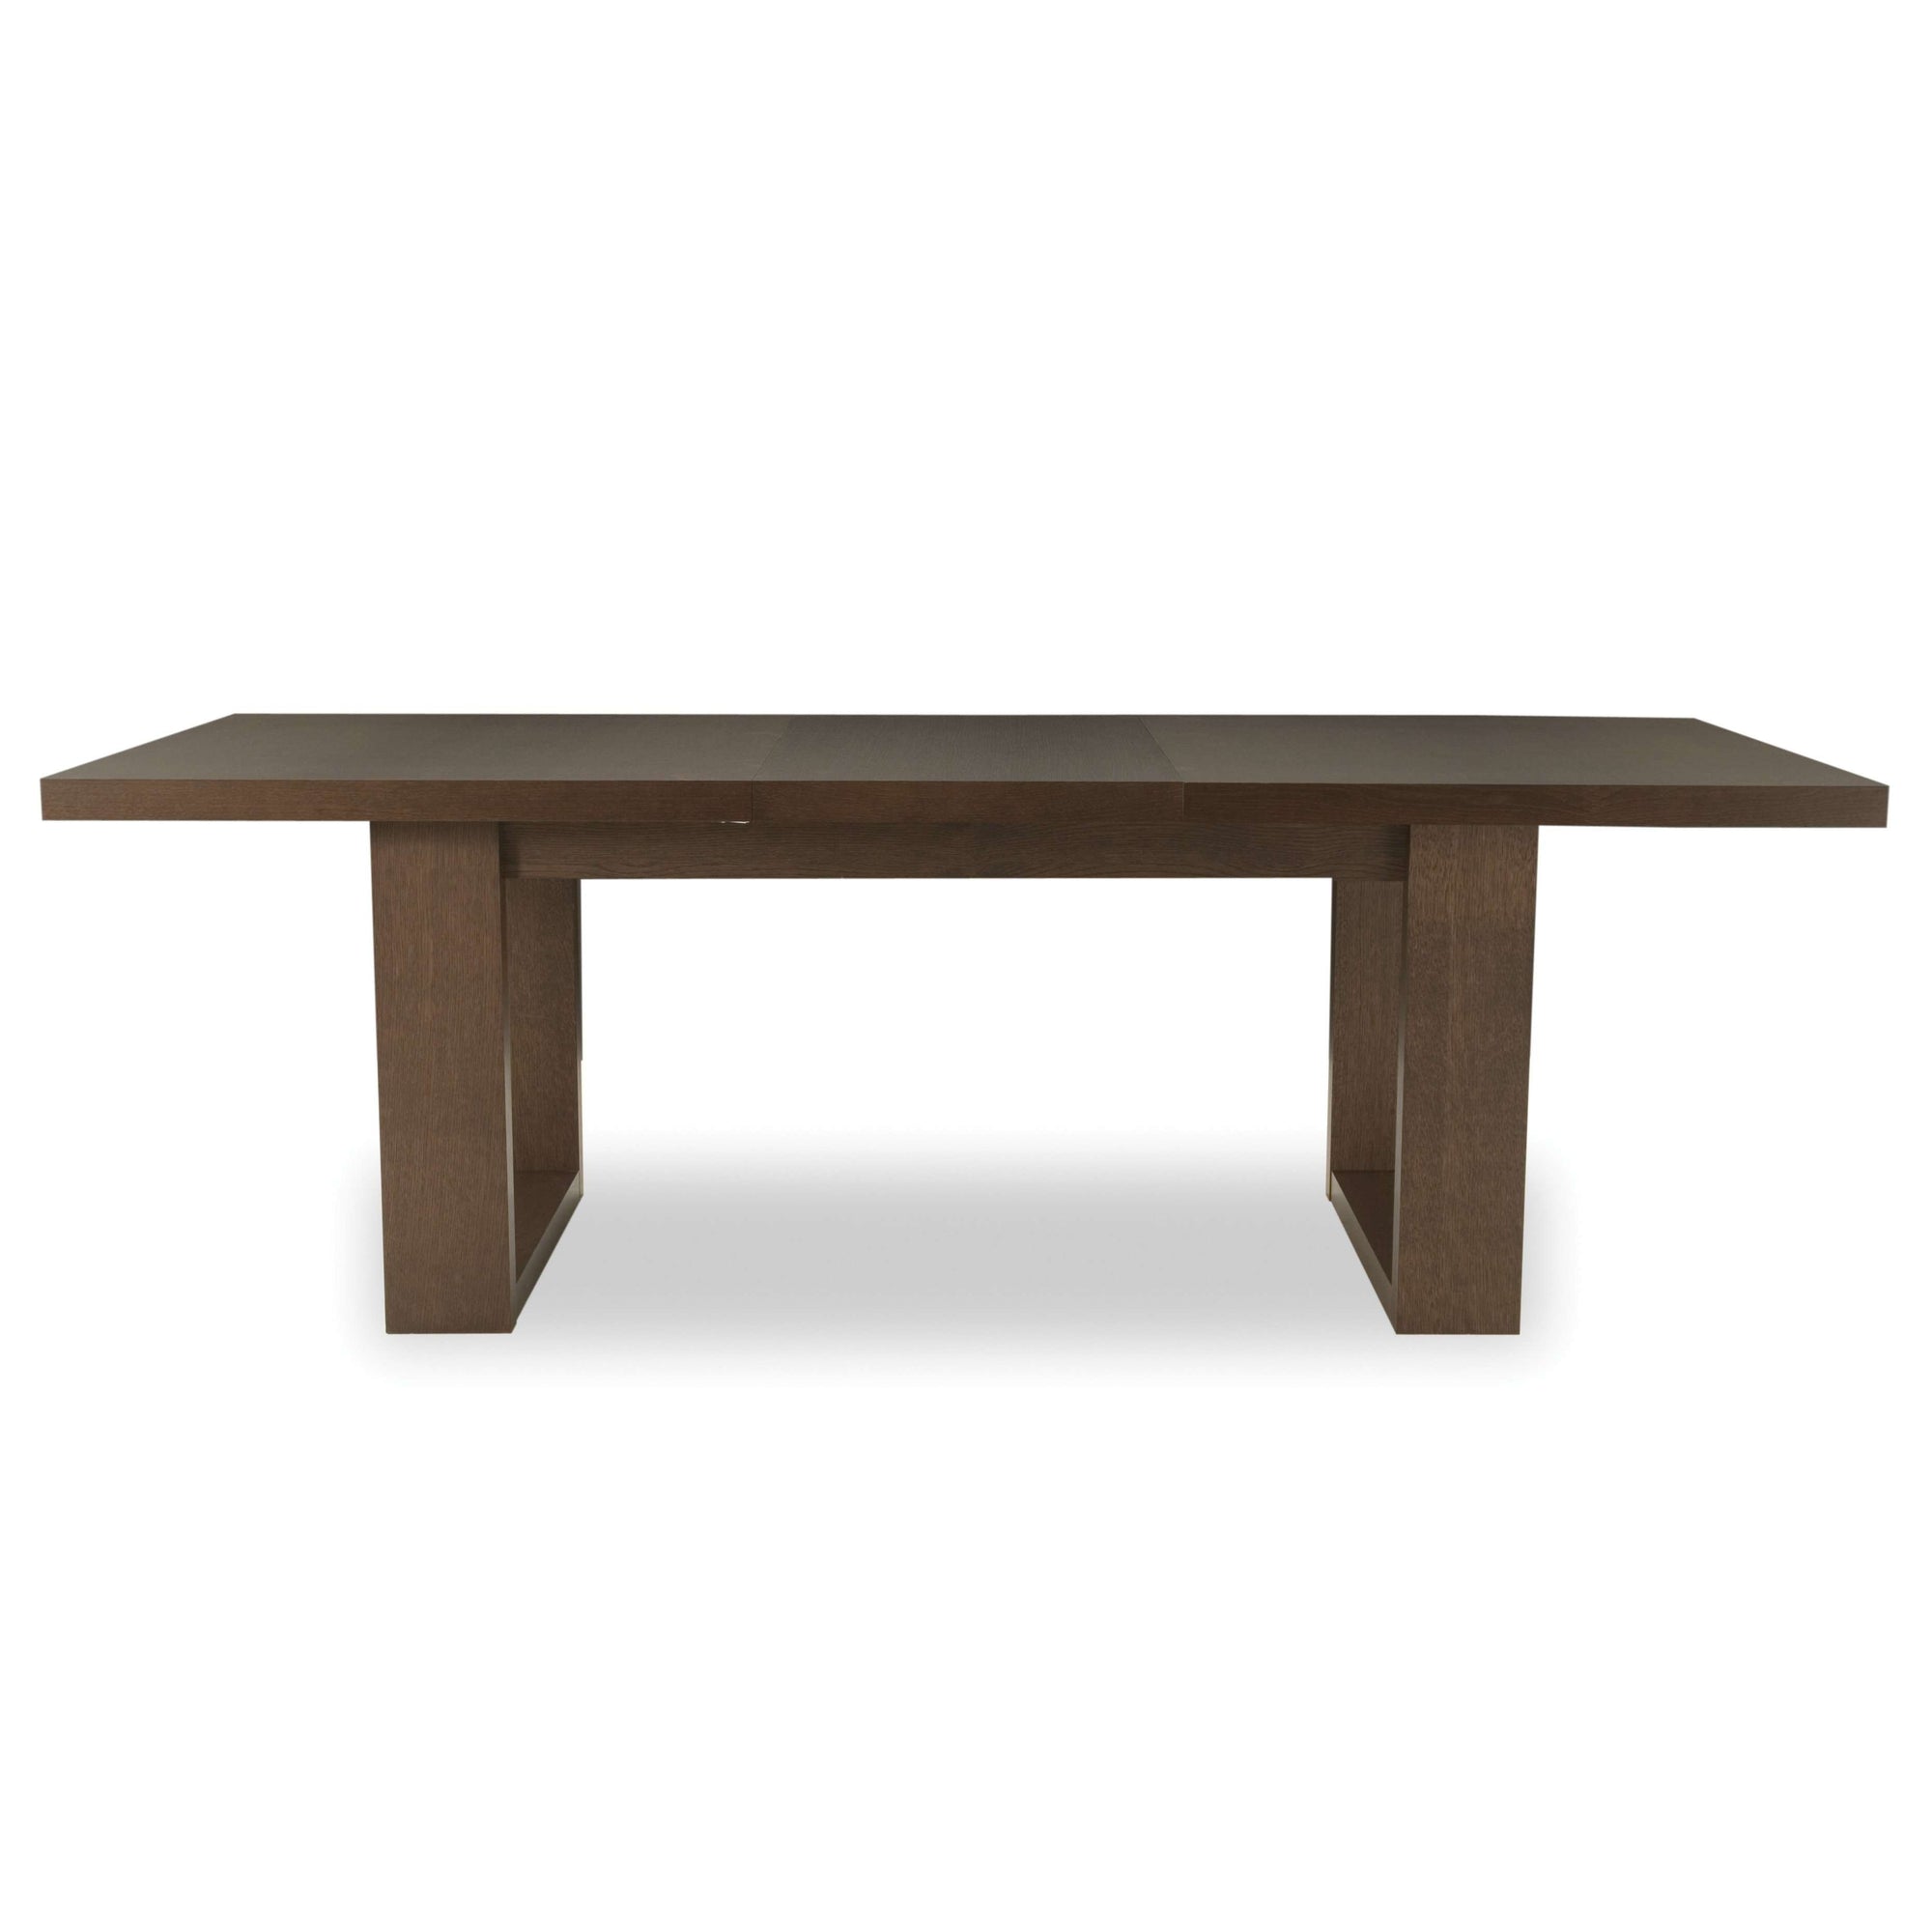 Tema Home-Tundra 71" Dining Table w/ Extension 056040-TUNDRA71E-Dining Table-MODTEMPO